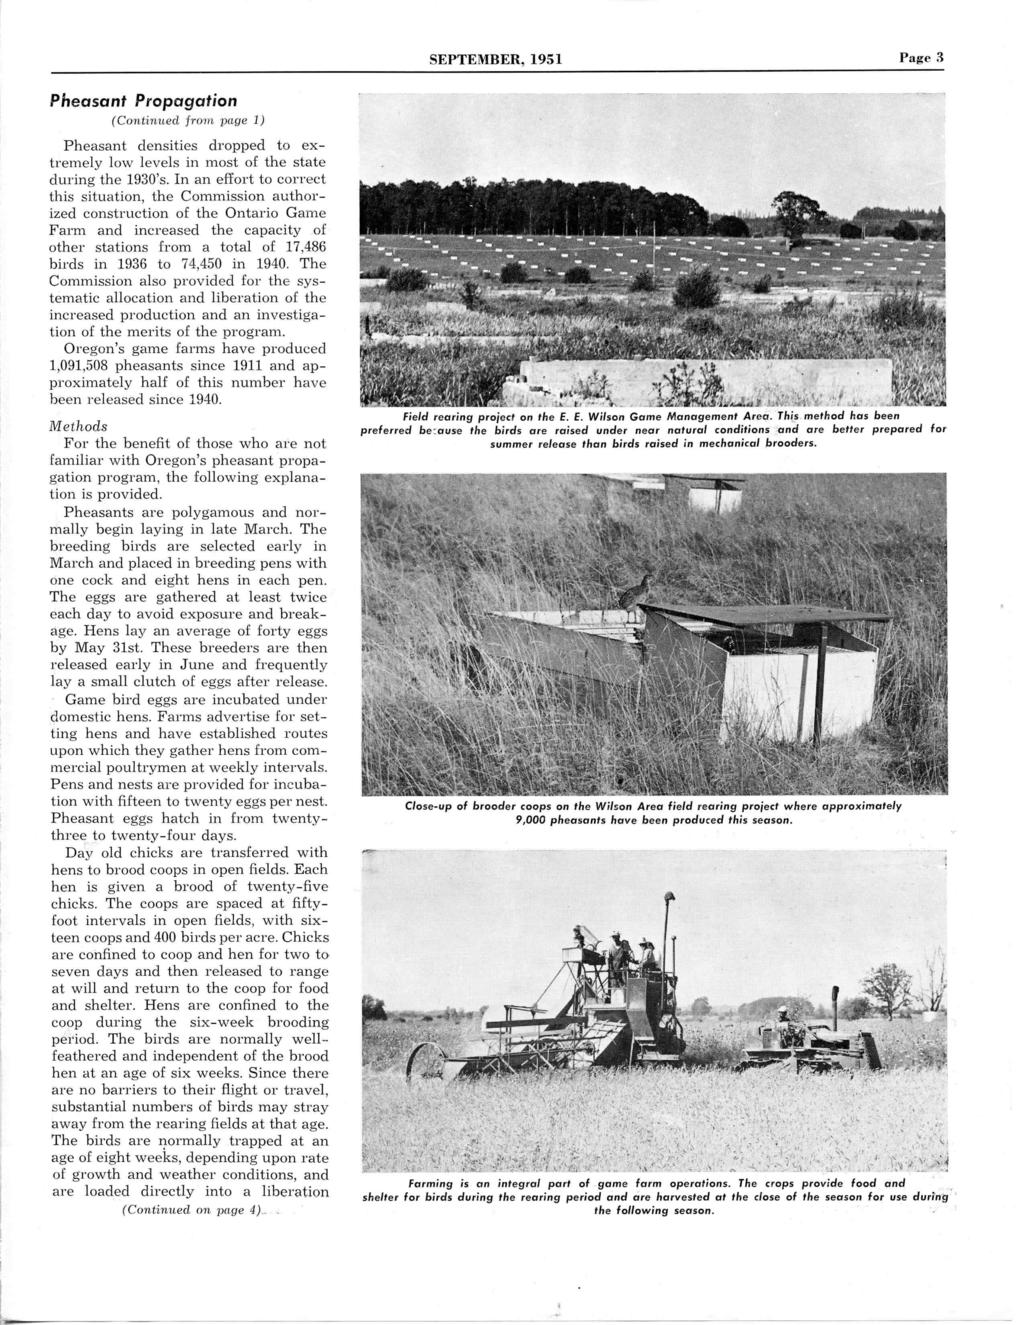 SEPTEMBER, 1951 Page 3 Pheasant Propagation (Continued from page 1) Pheasant densities dropped to extremely low levels in most of the state during the 1930's.